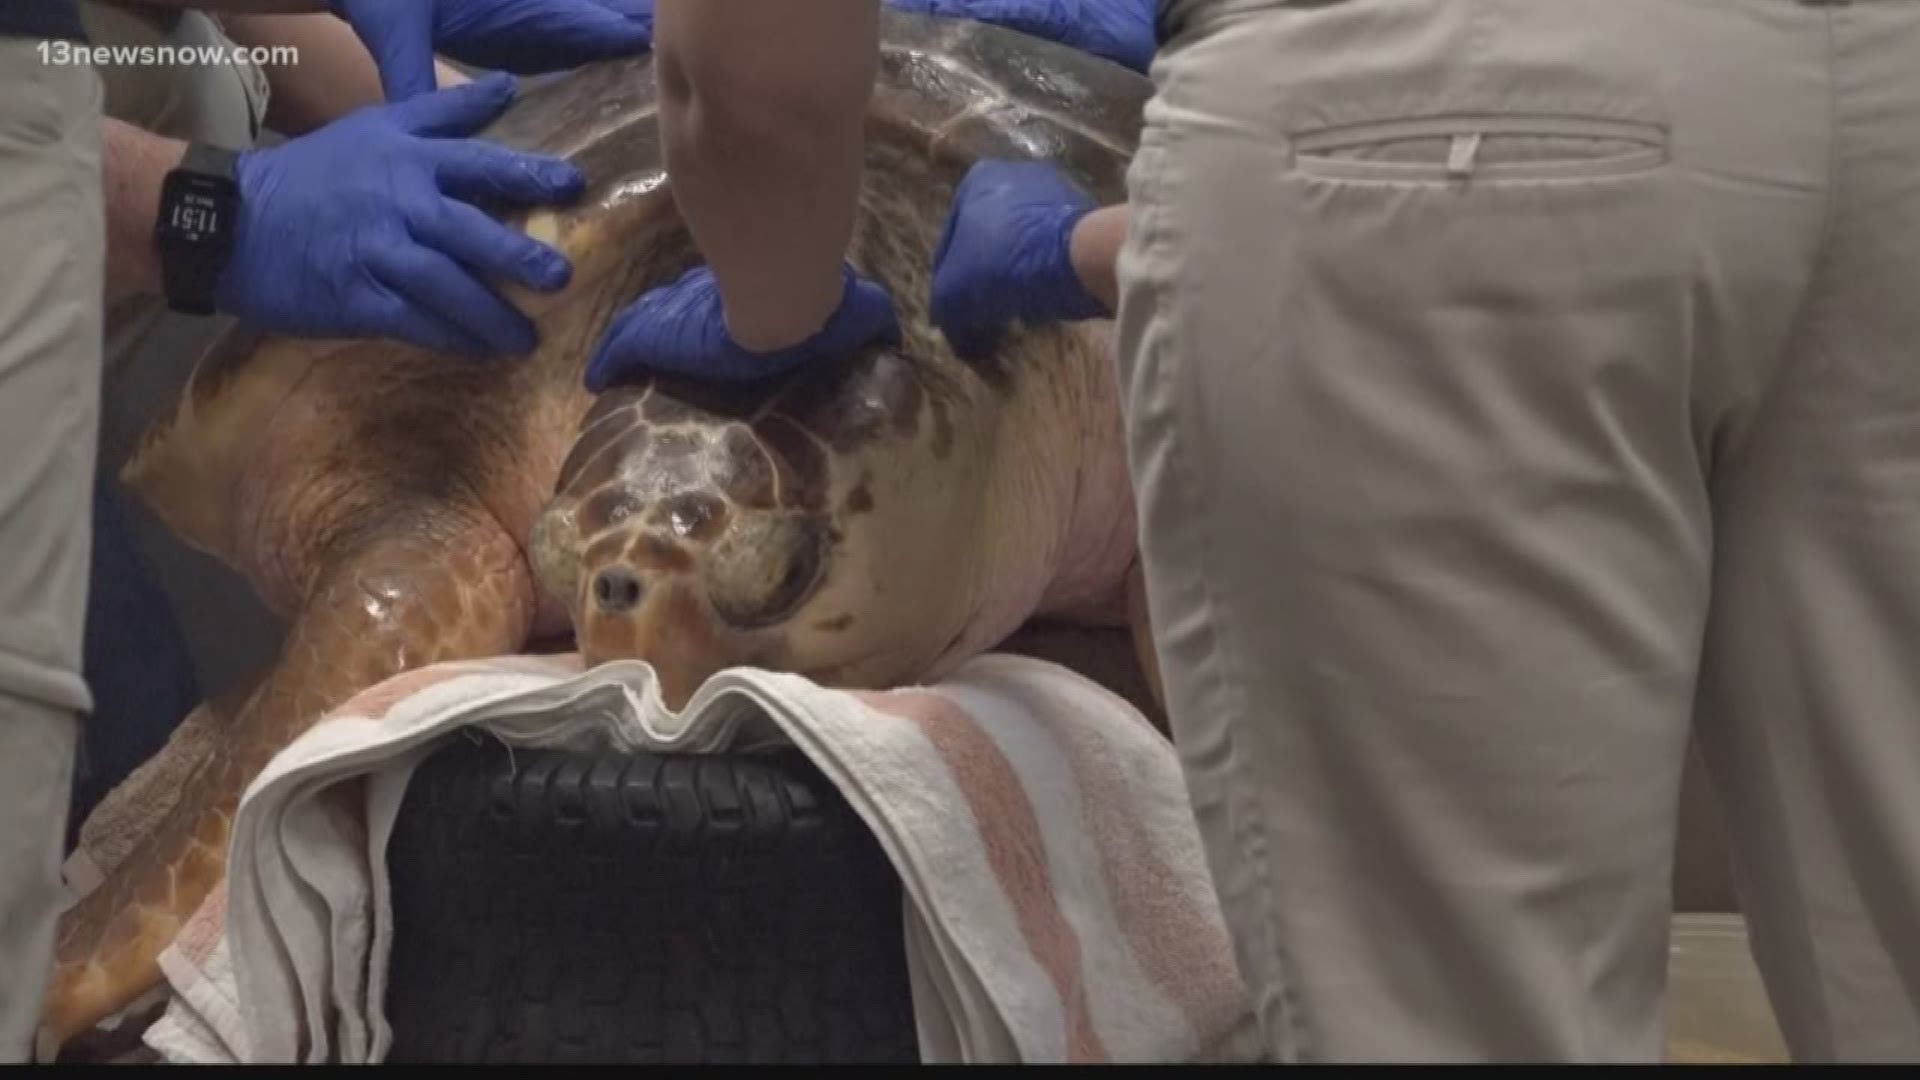 With the temperature dropping, rescuers with the Virginia Aquarium have responded to more than a dozen reports of cold-stunned sea turtles.